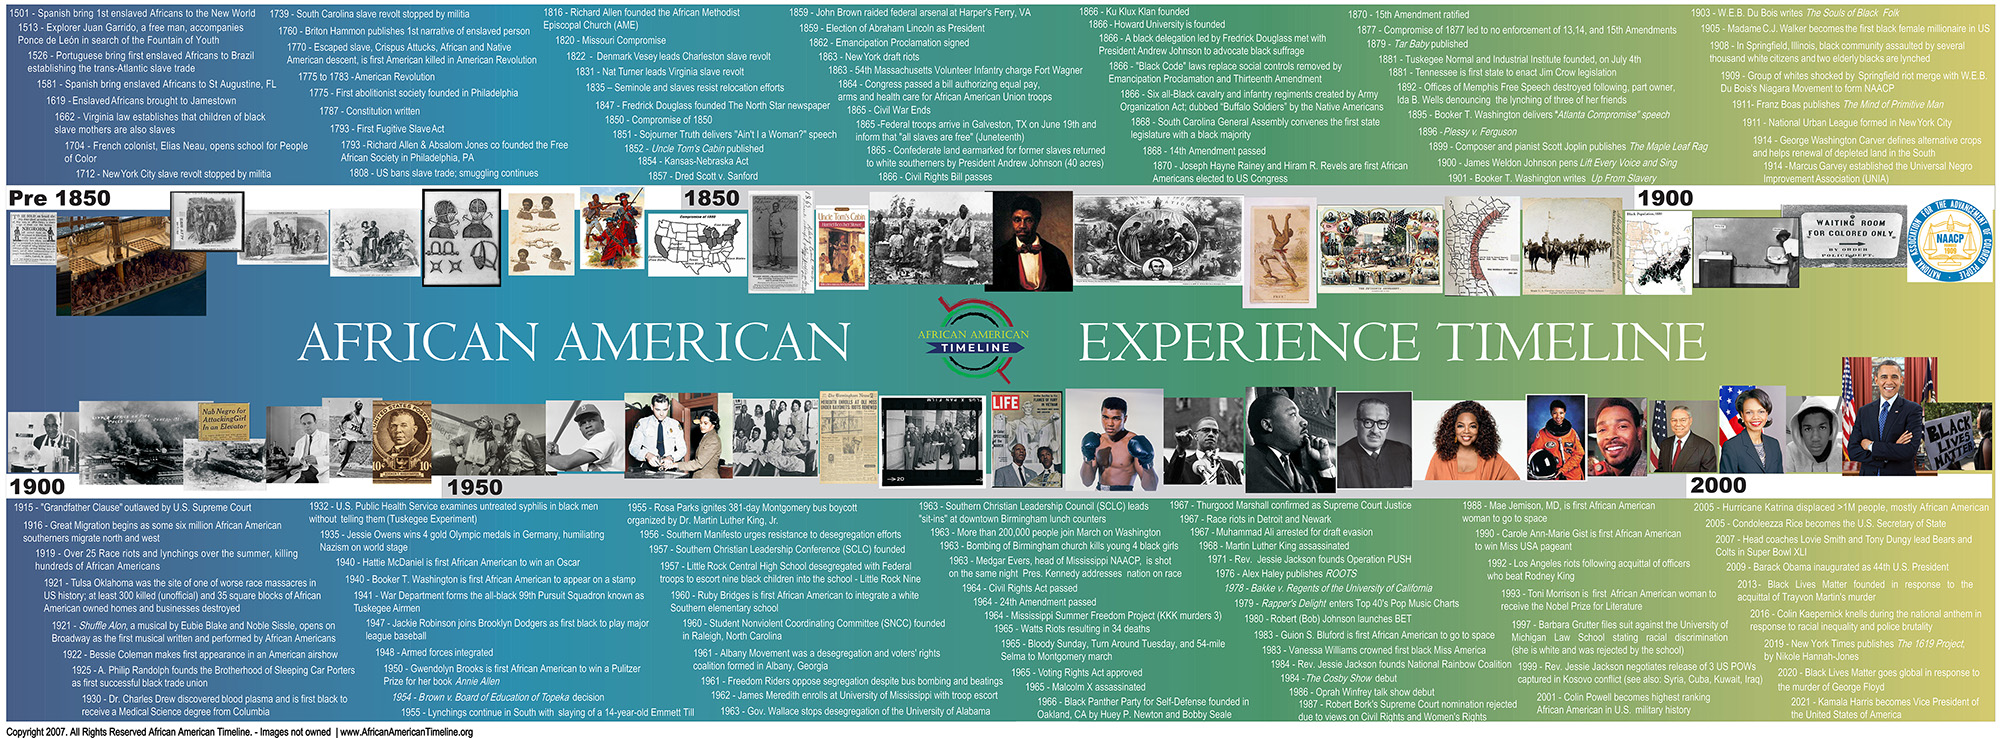 african american timeline image